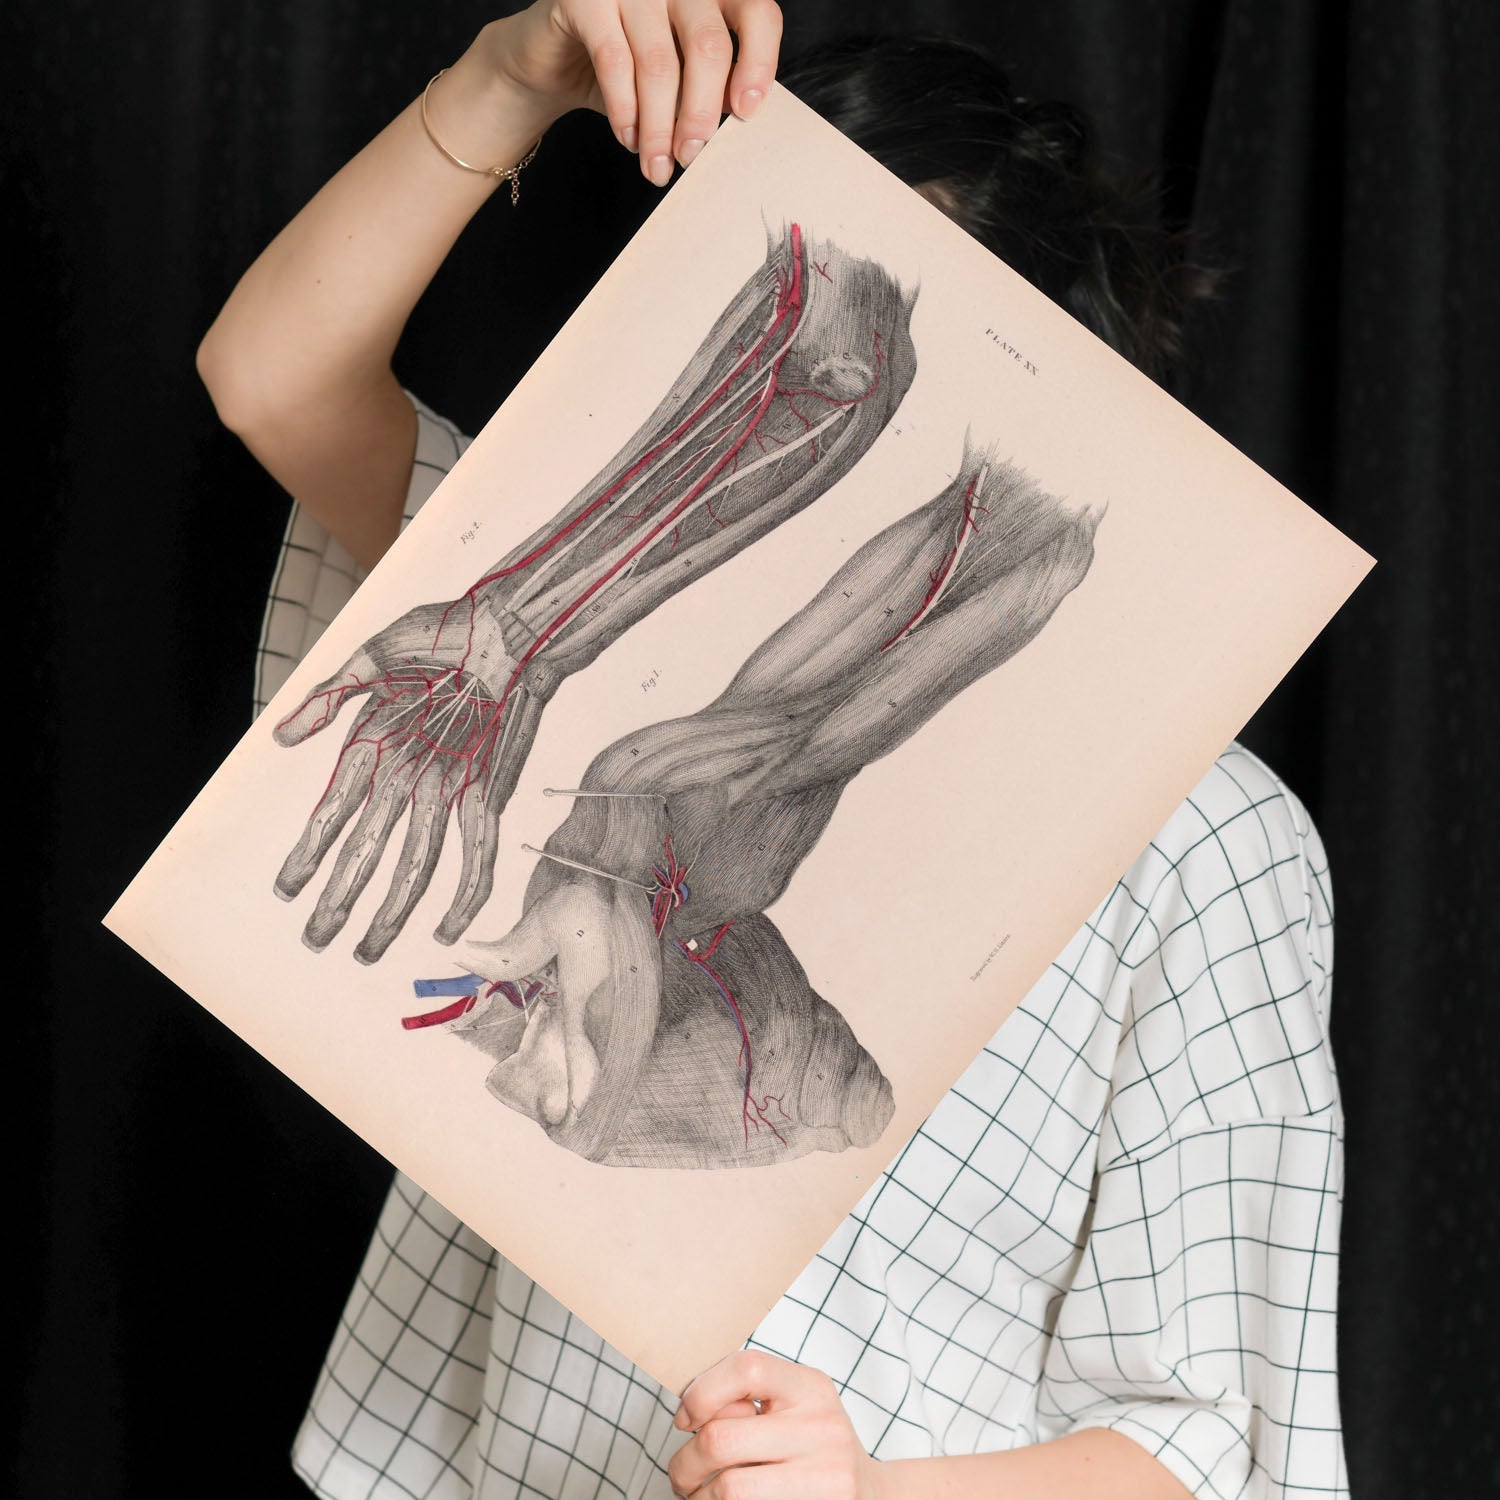 Dissection of the arm and hand-Artwork-Nacnic-Nacnic Estudio SL